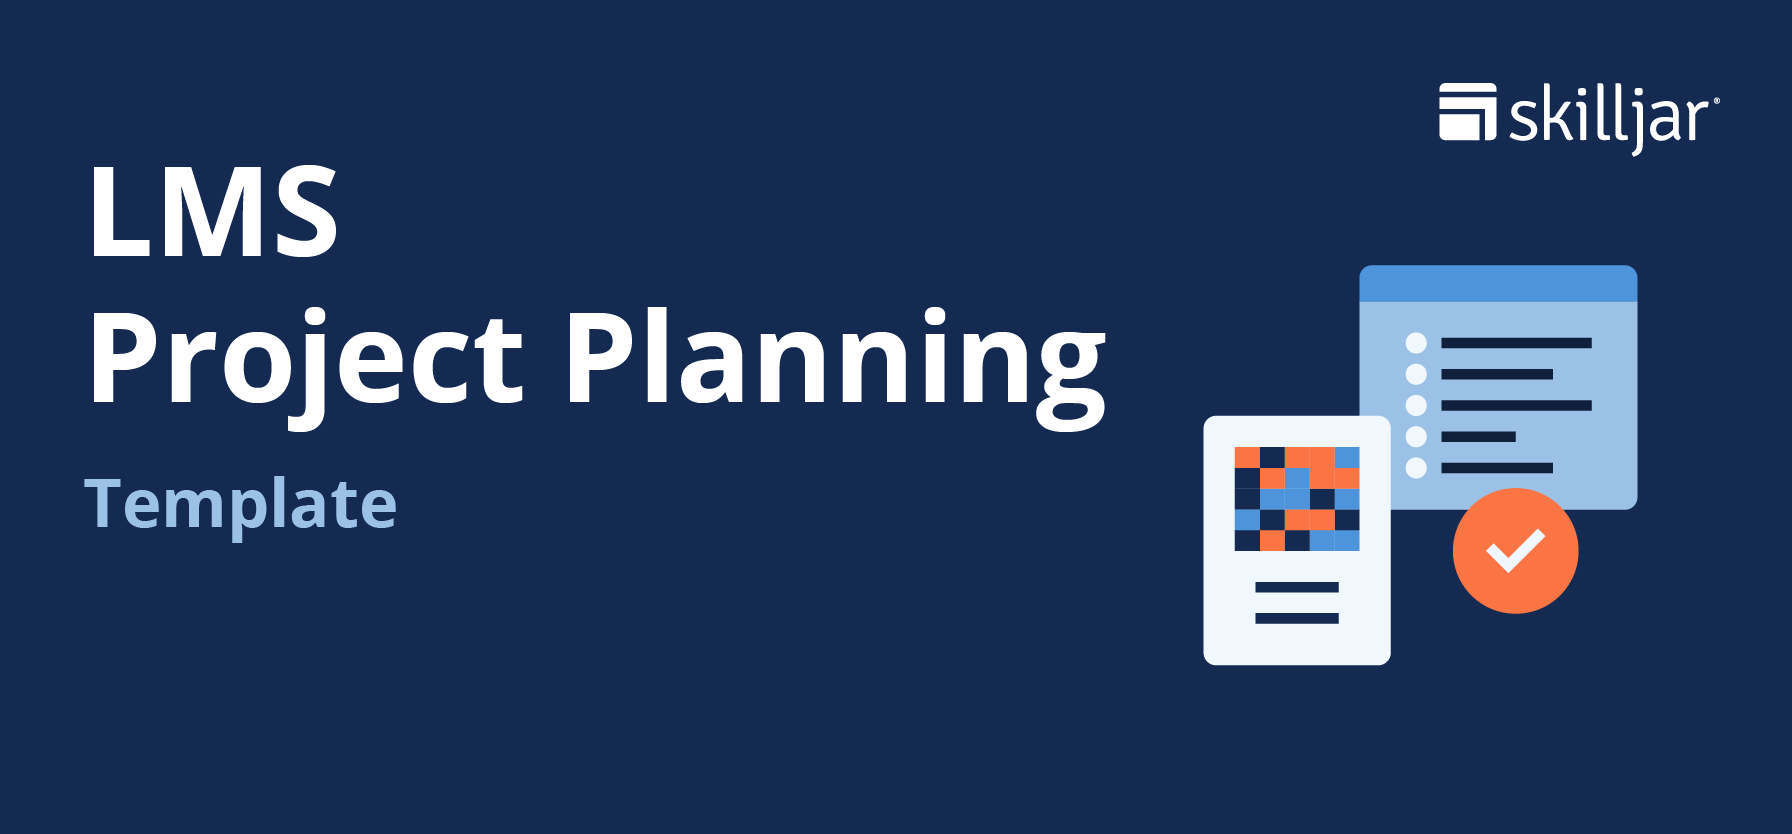 LMS Project Planning Template